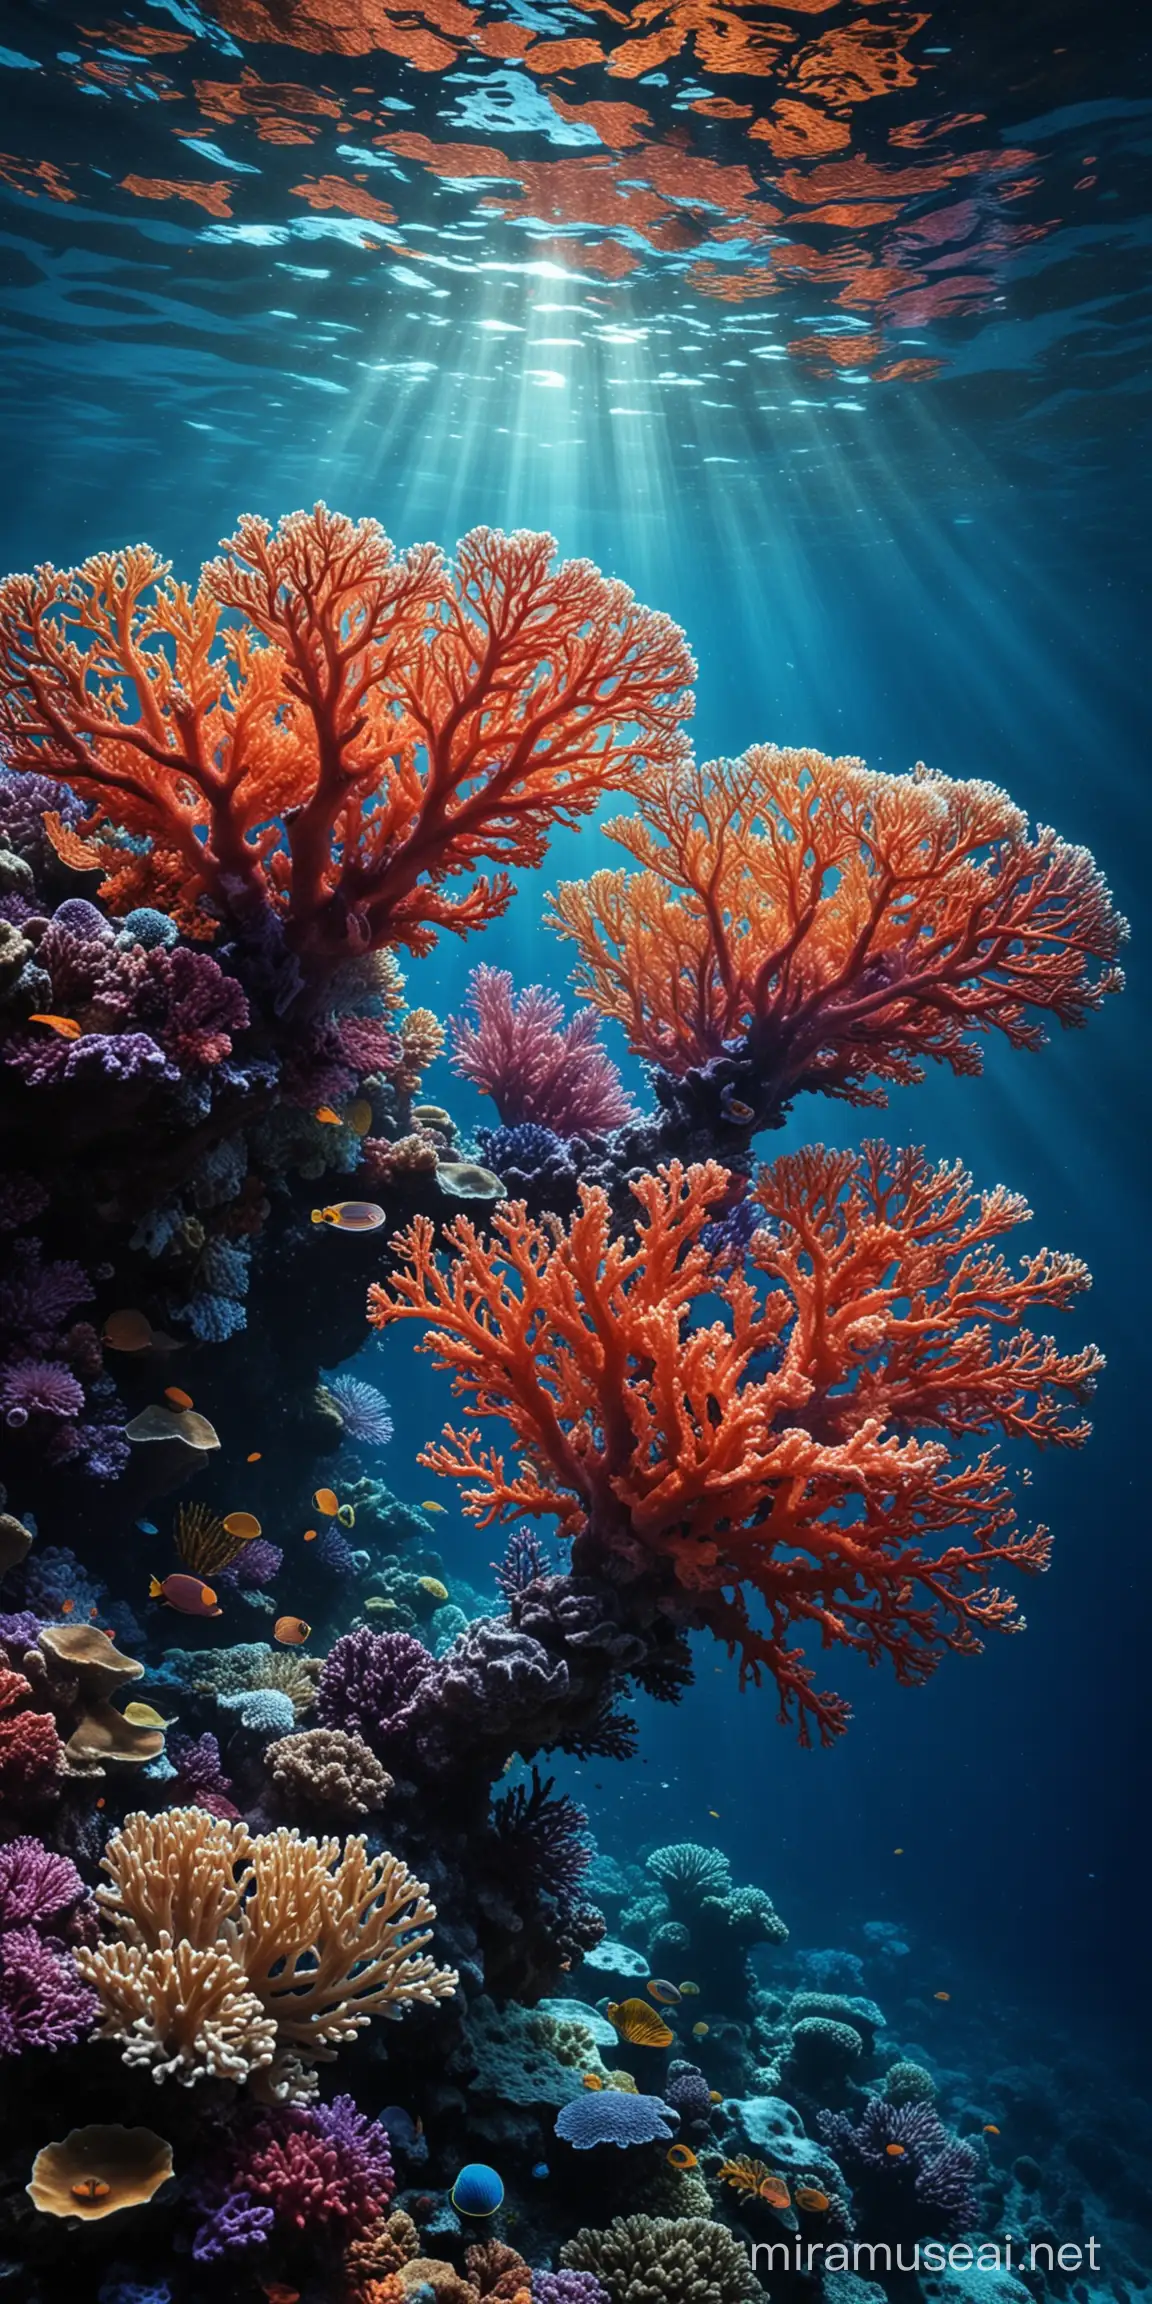 Mystical Multicolored Corals Illuminated by a Ray of Light in the Deep Blue Sea